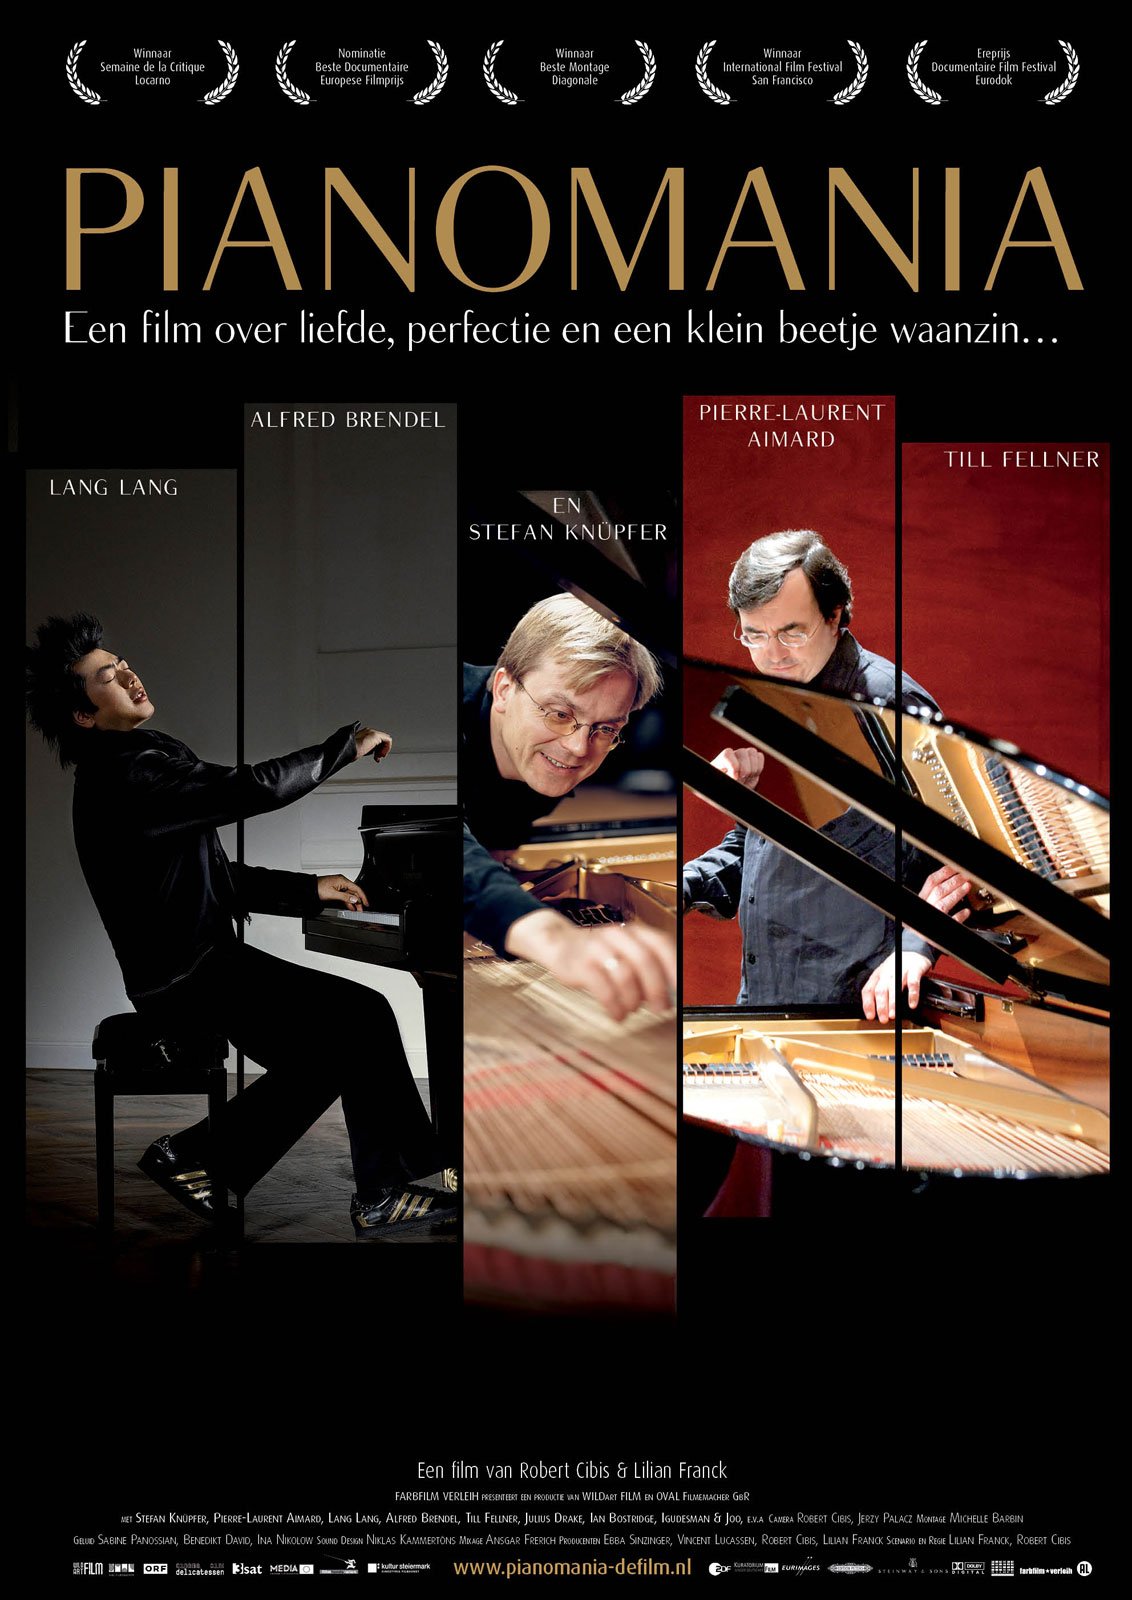 Poster of the movie Pianomania